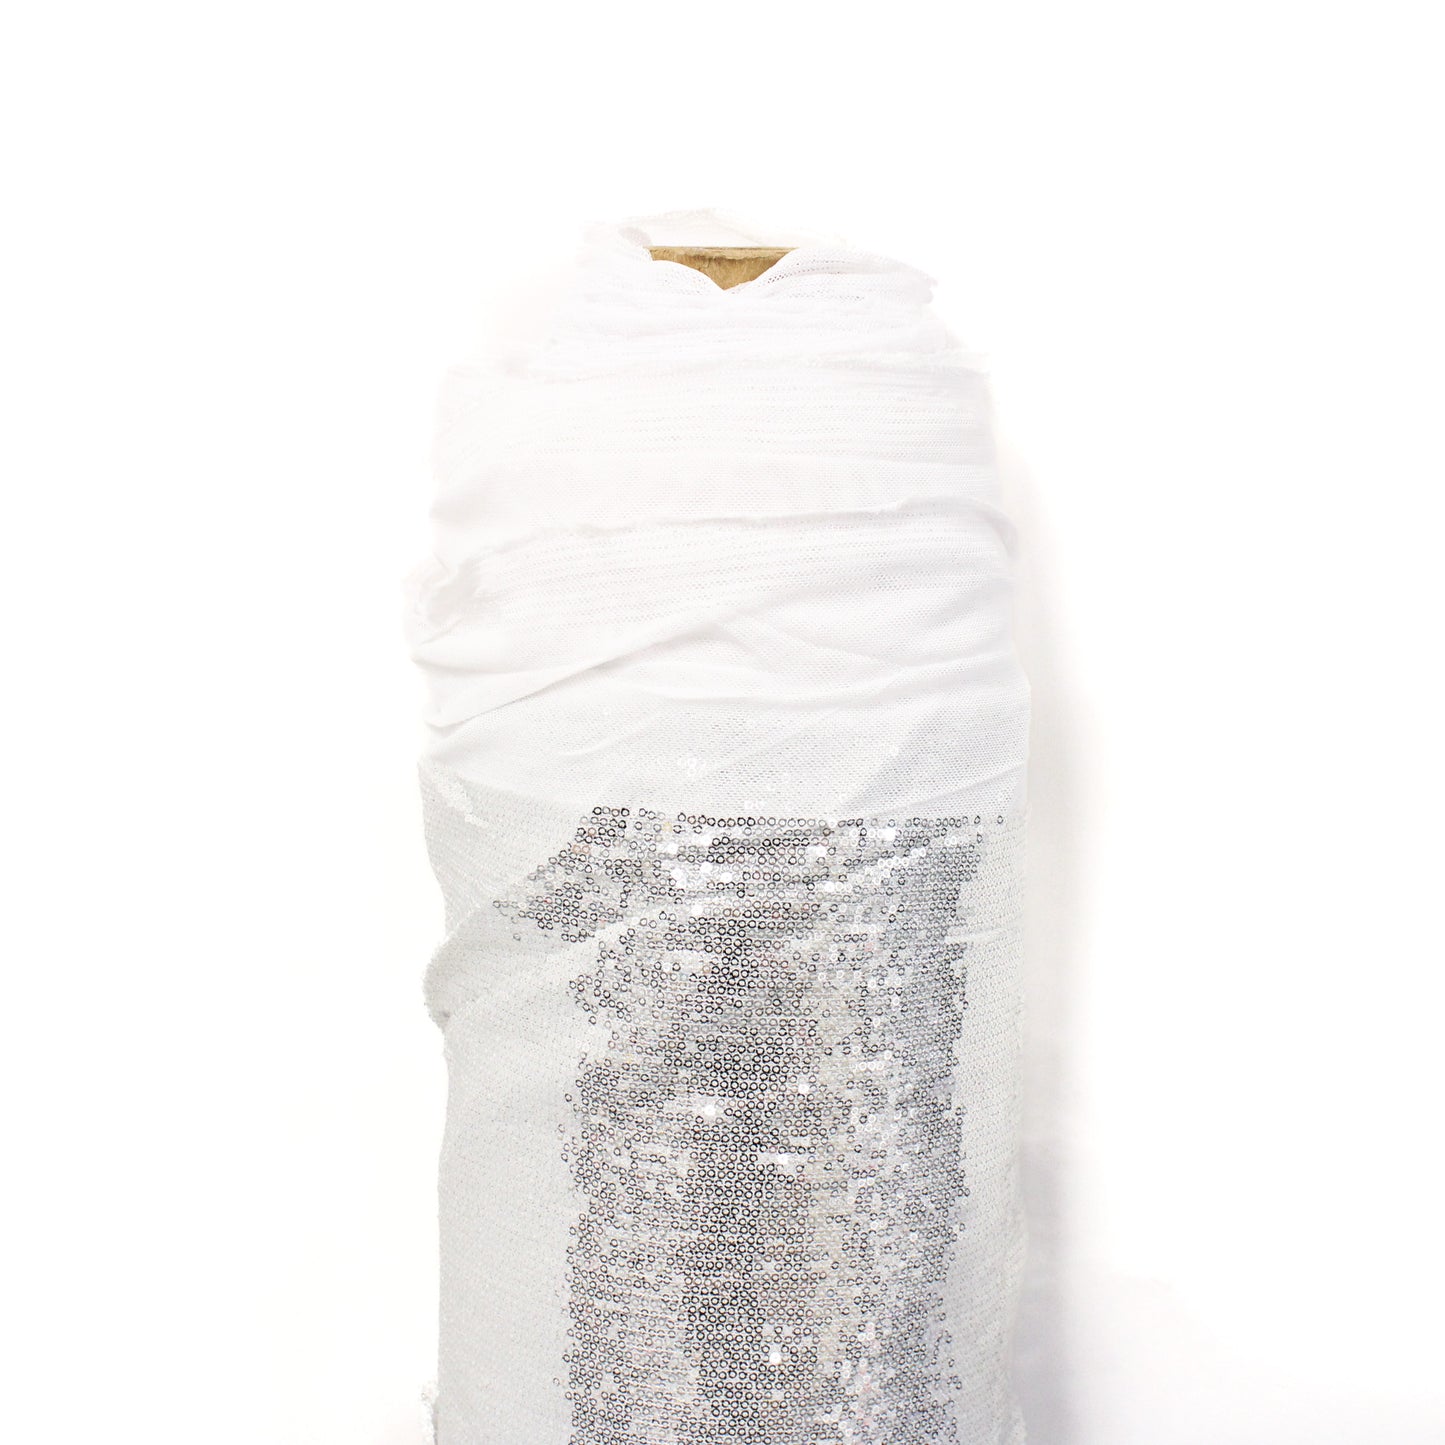 WHOLESALE ROLL - SILVER SEQUIN MESH